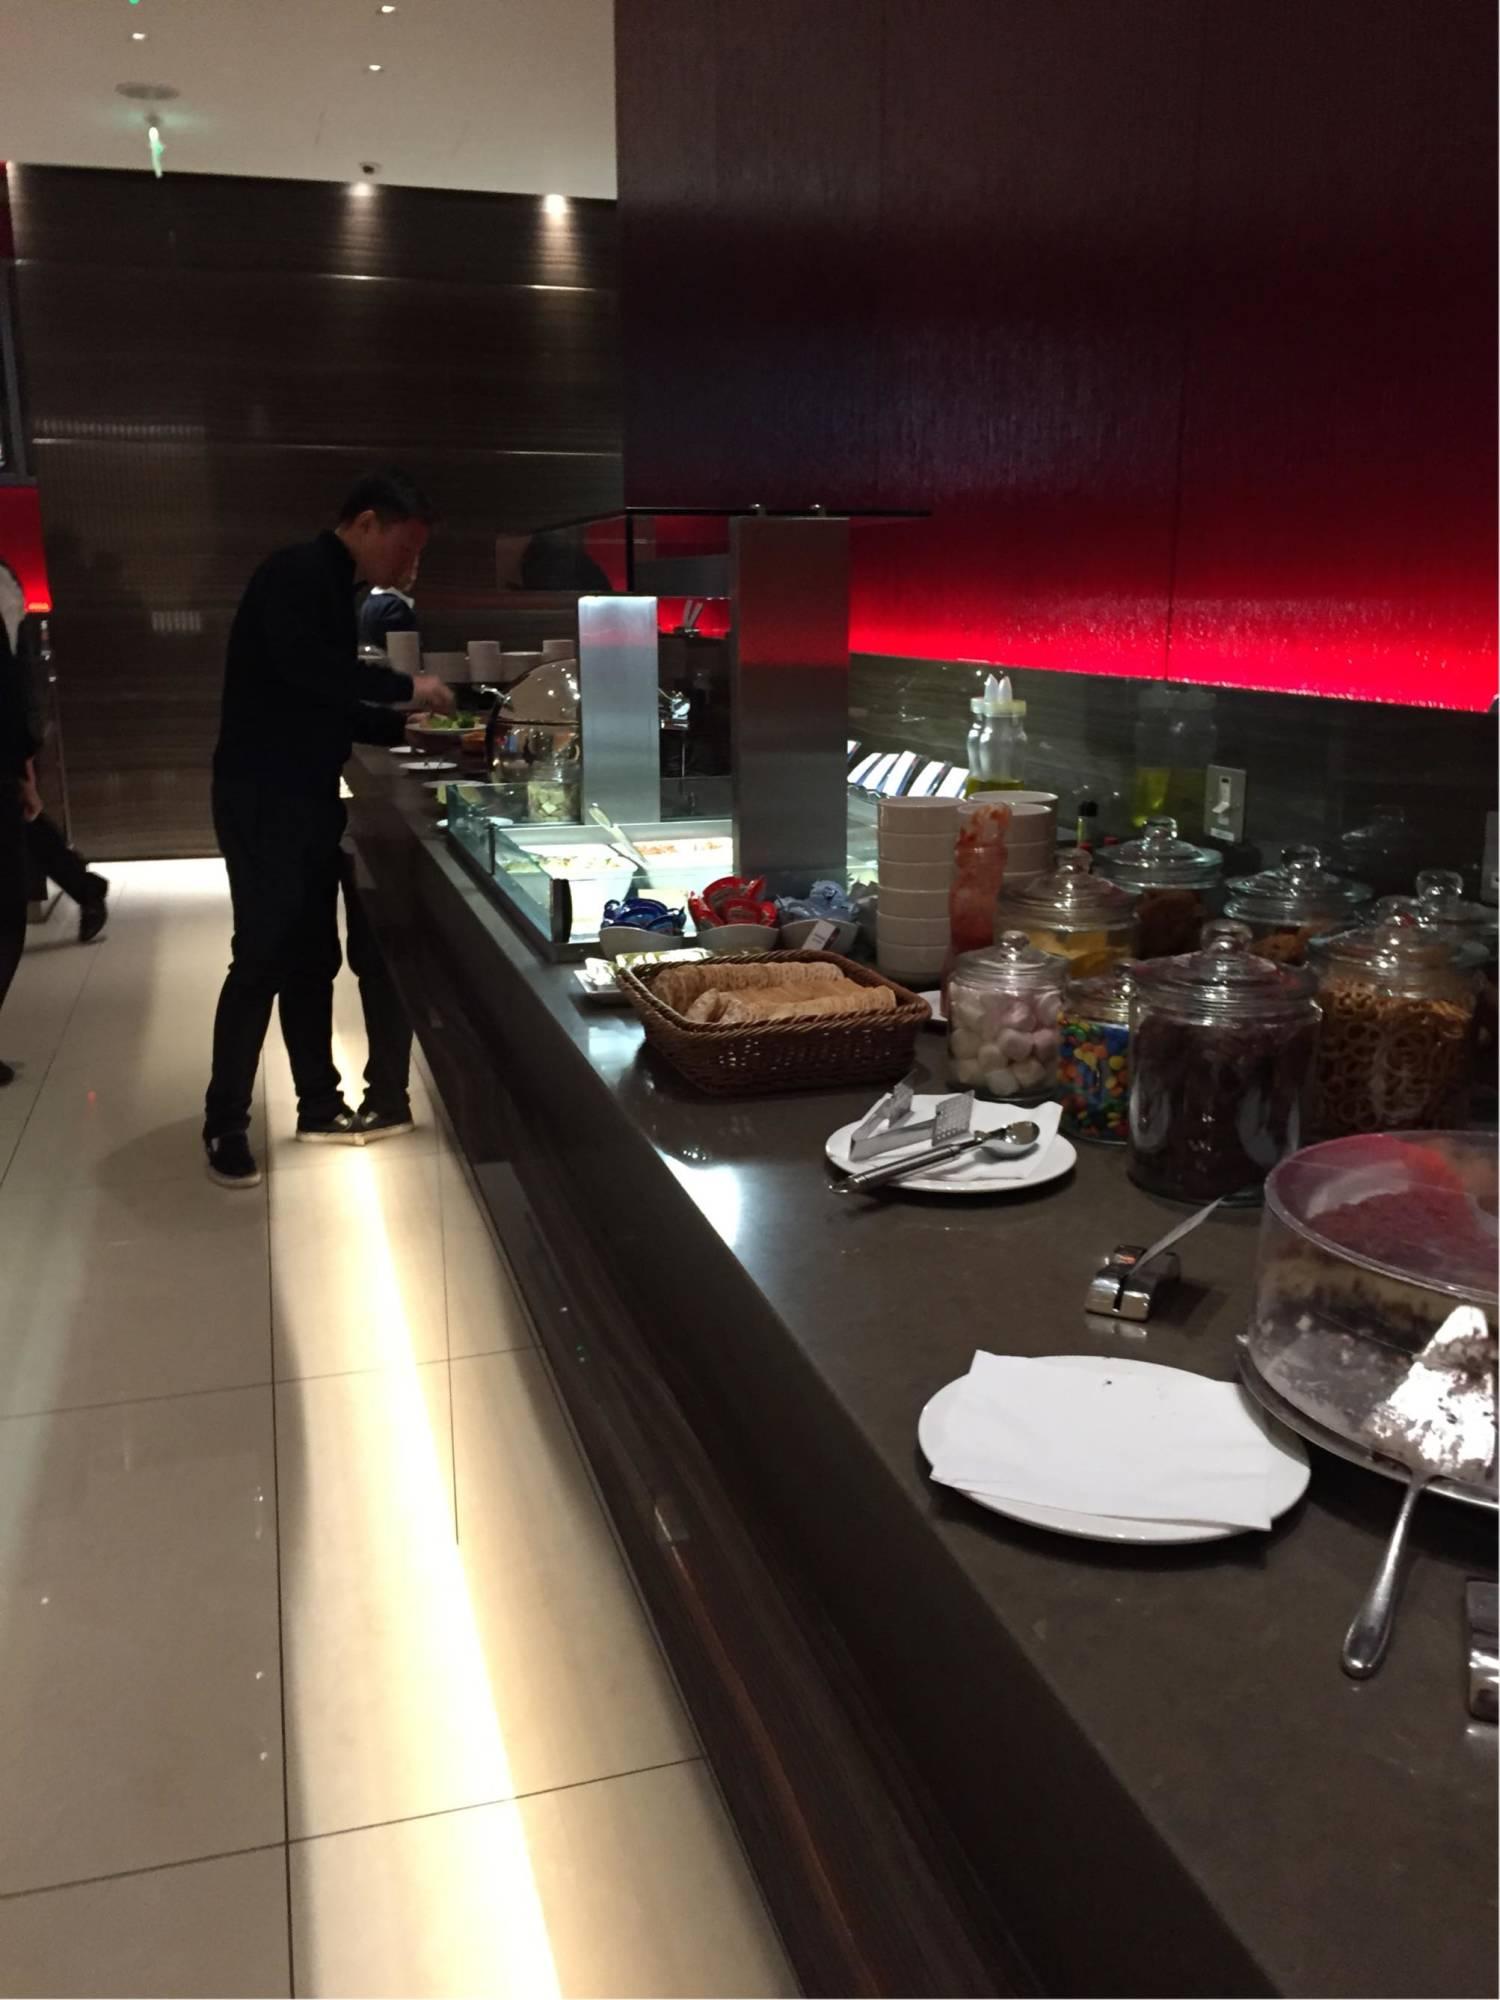 Air Canada Maple Leaf Lounge image 22 of 27